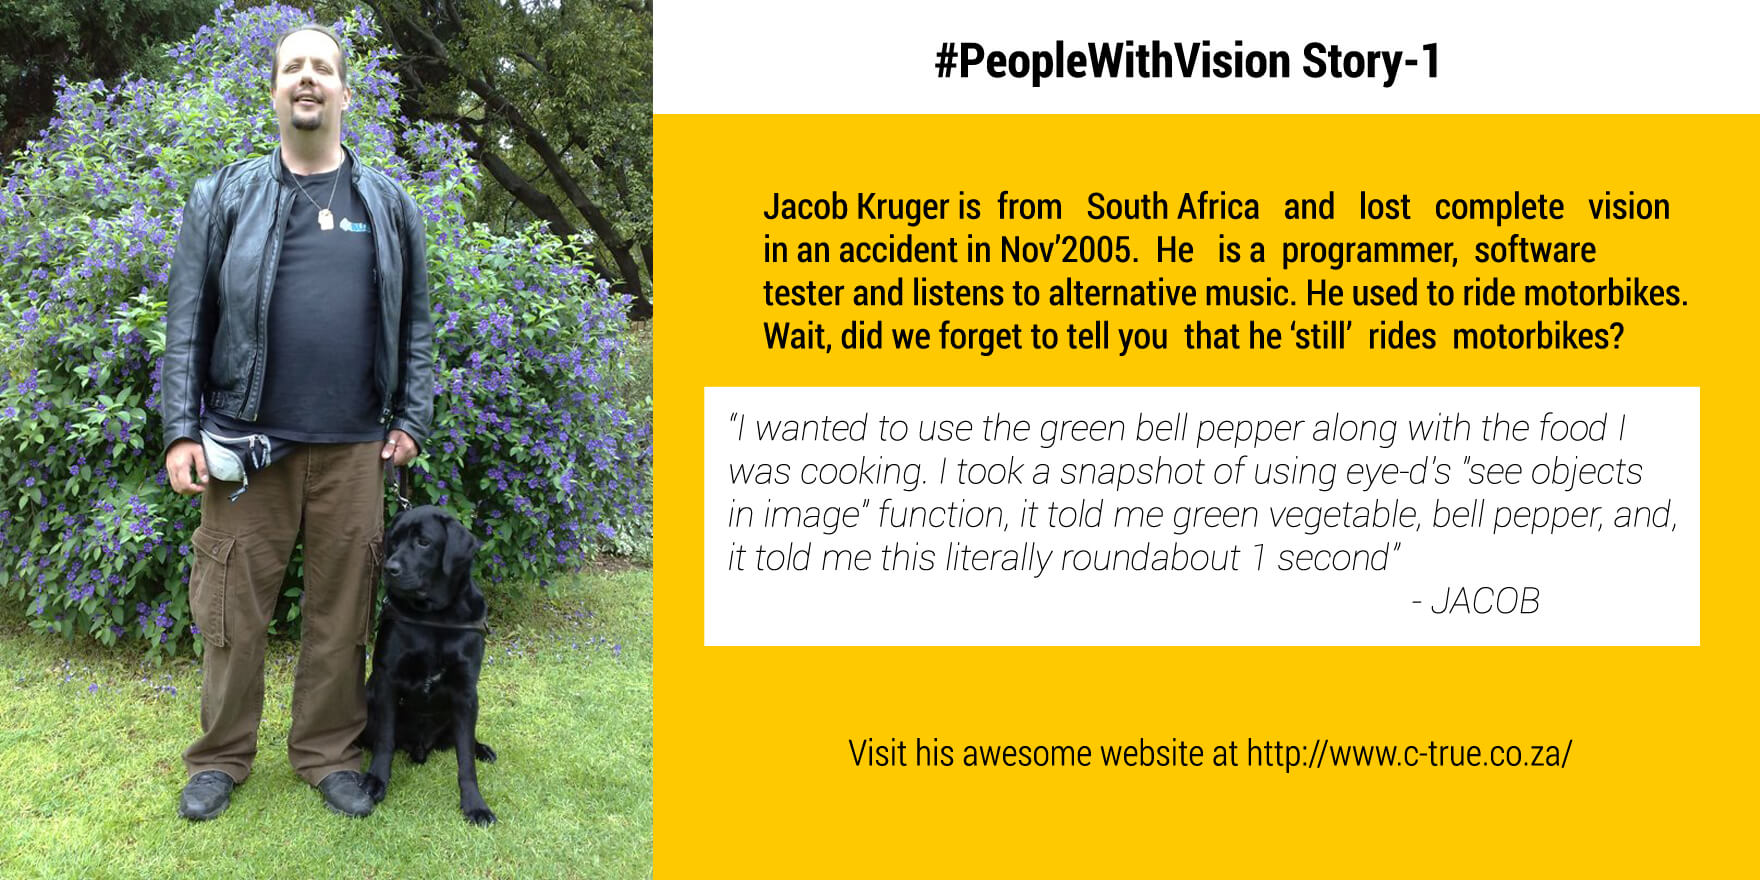 Picture shows Eye-D App user Jacob along with his guide dog on left, on the right is an instance how Jacob leveraged the Eye-D App's See Object feature to pick Green bell pepper for his dish